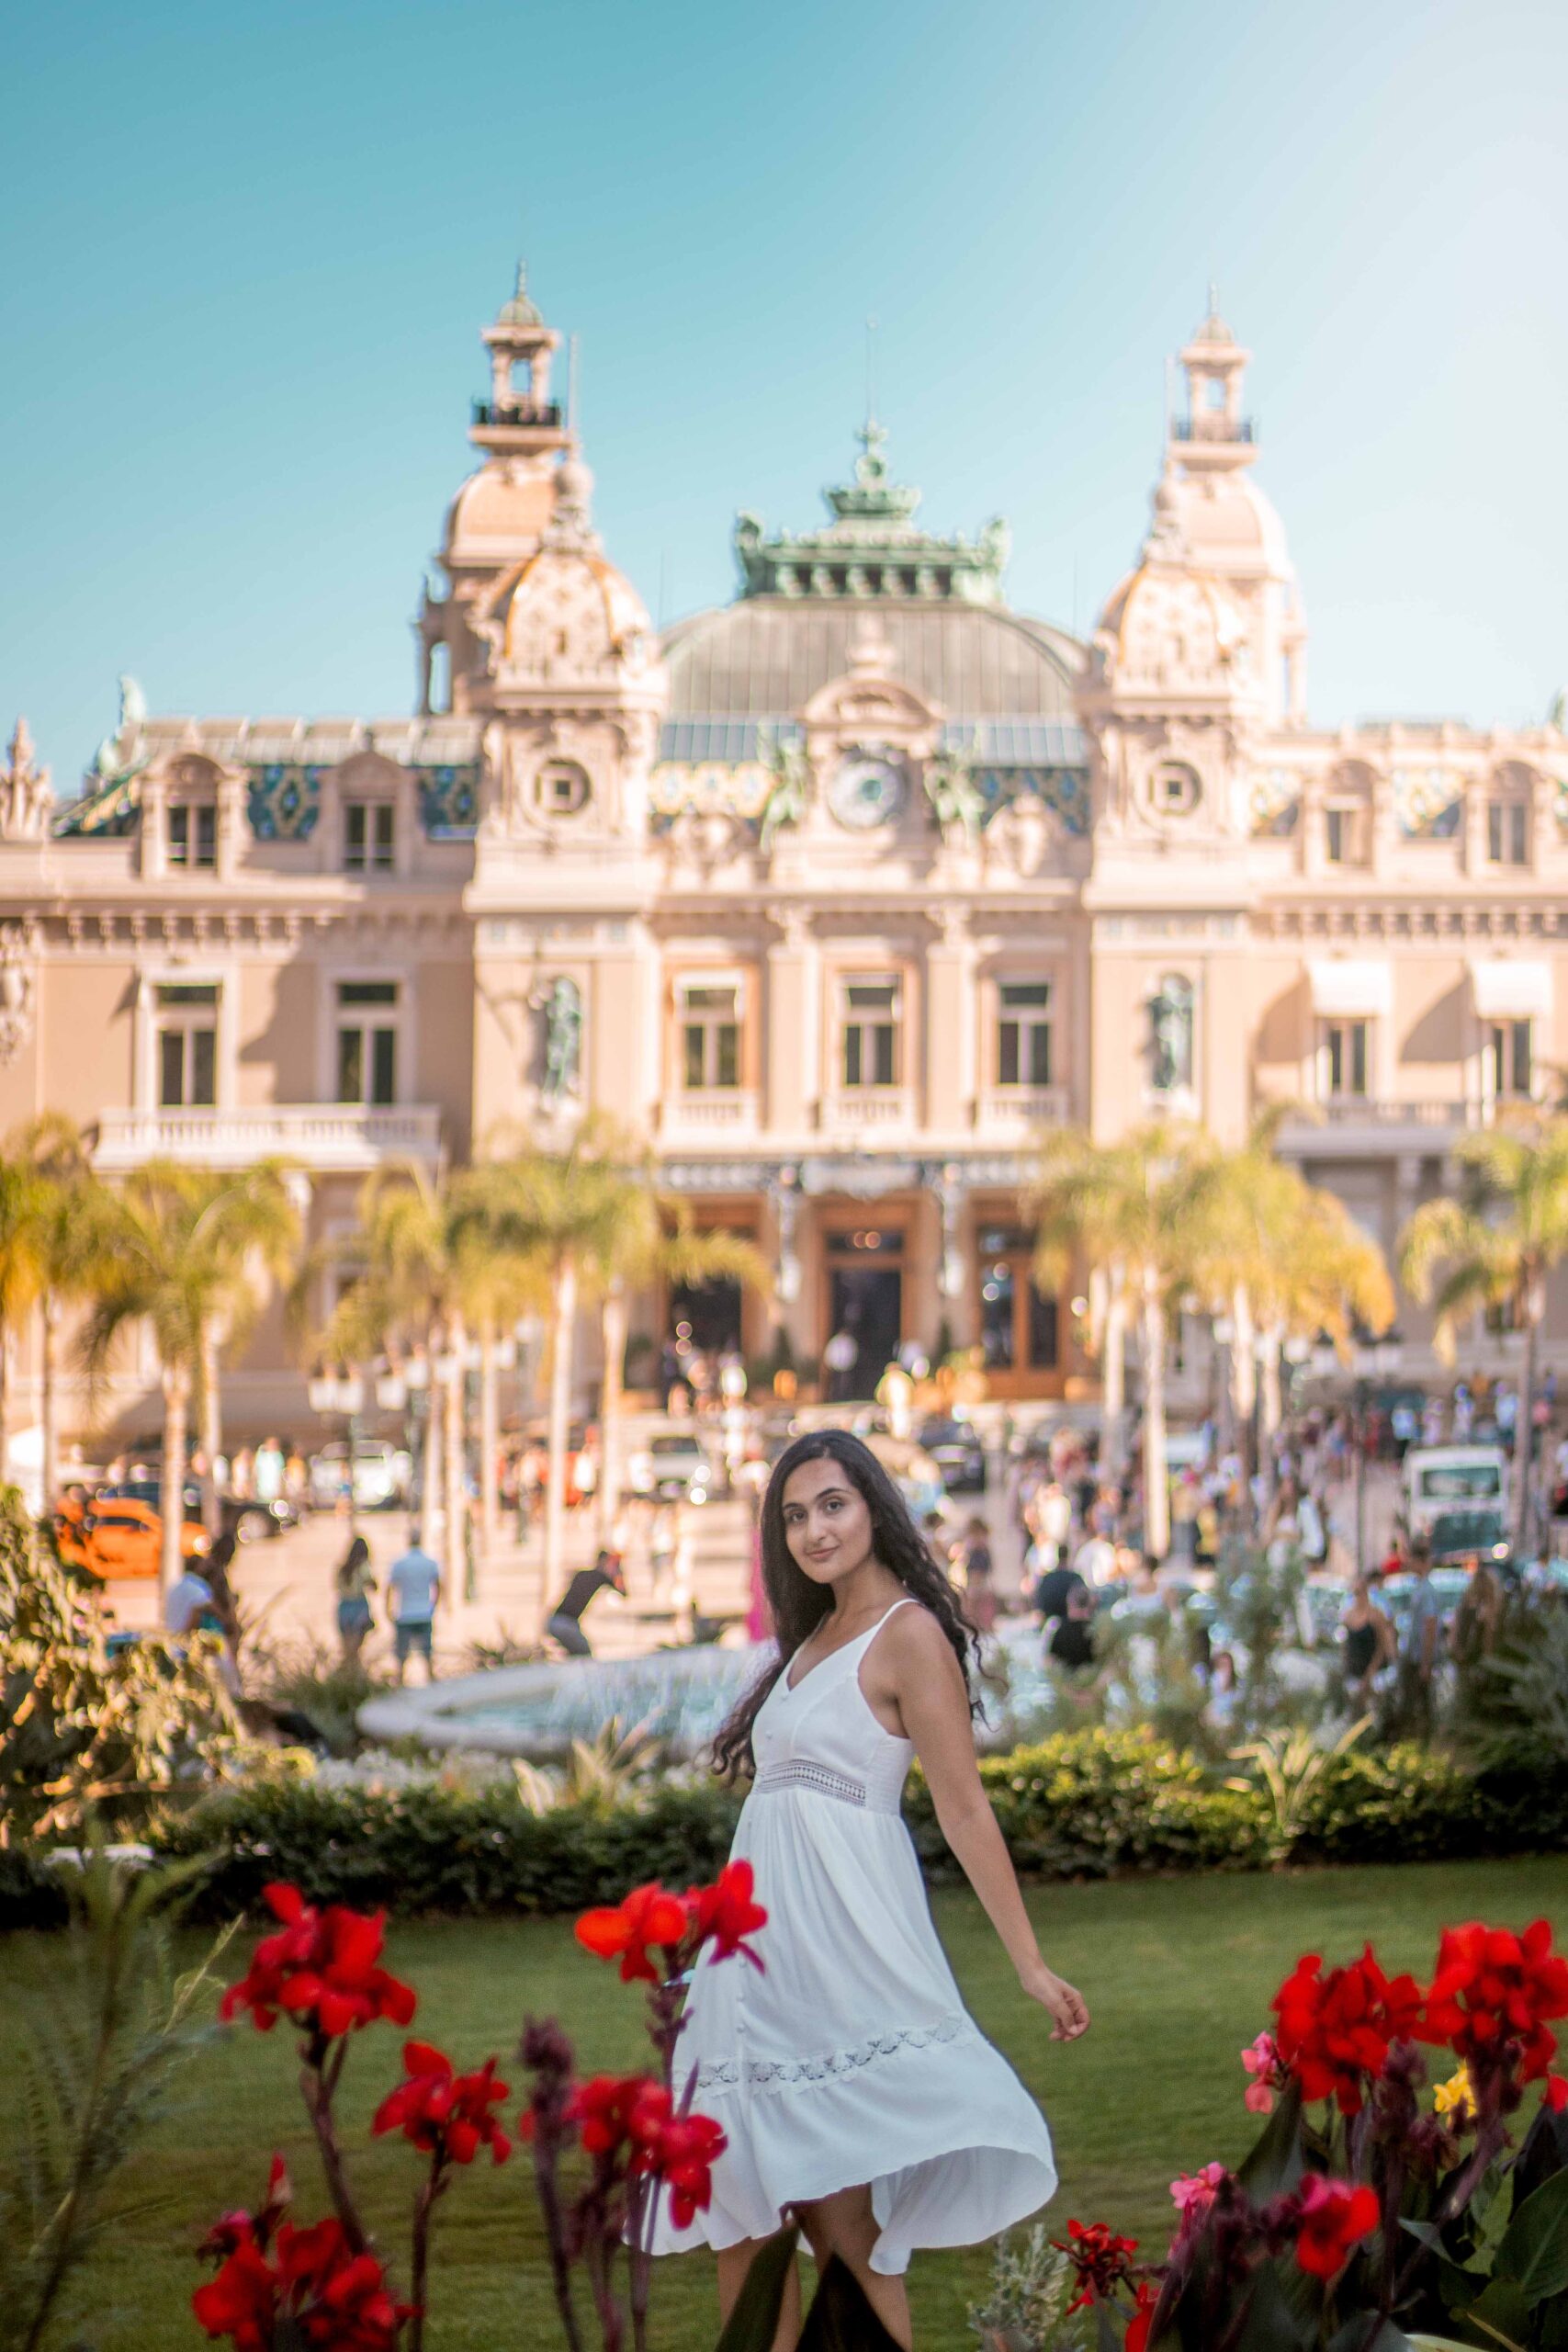 Woman wearing a white dress posing in front of the Monte-Carlo Casino in the Casino Garden during a sunny day in Monaco